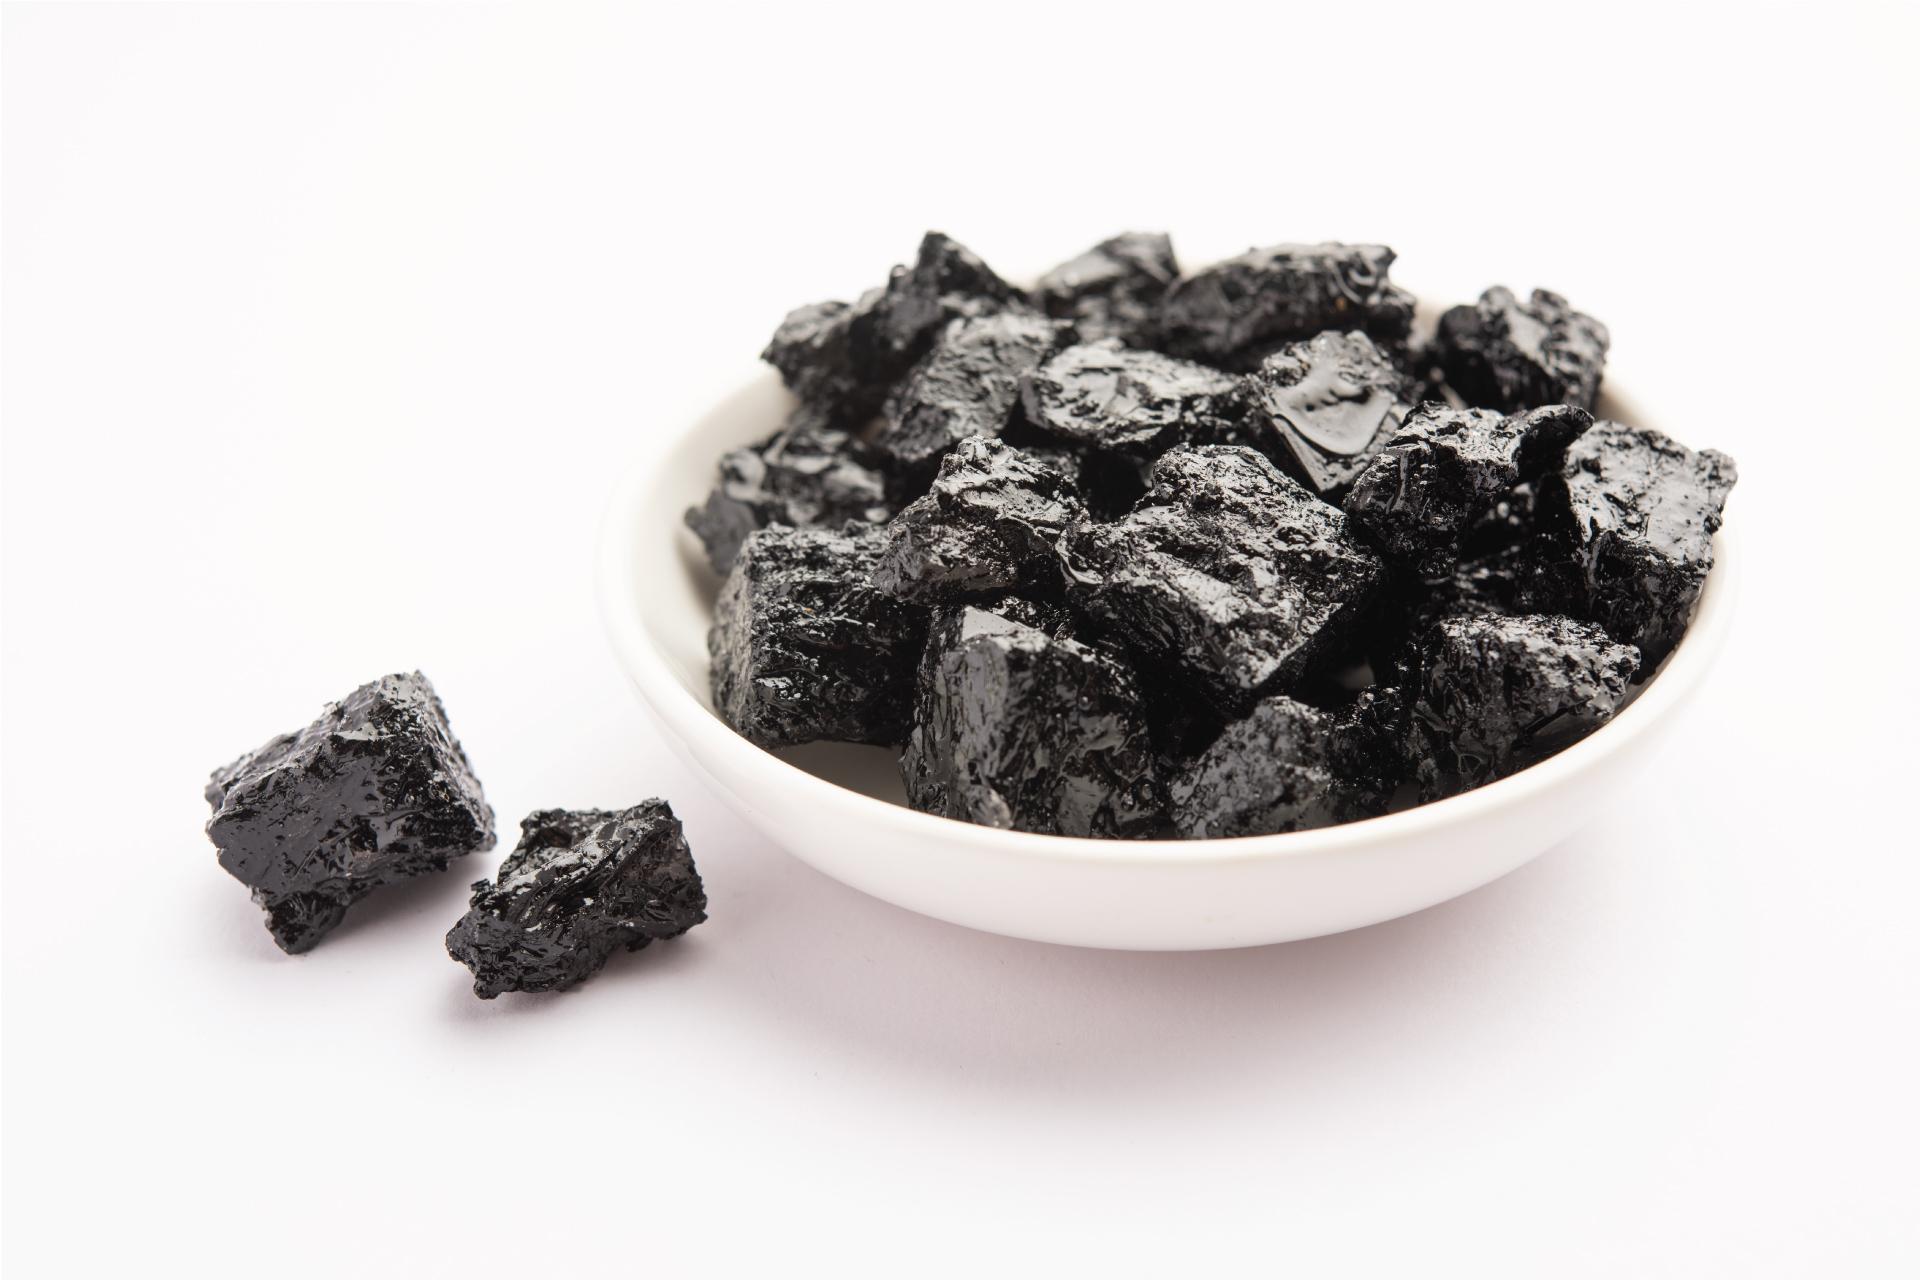 Shilajit: Top 10 Benefits and Side Effects